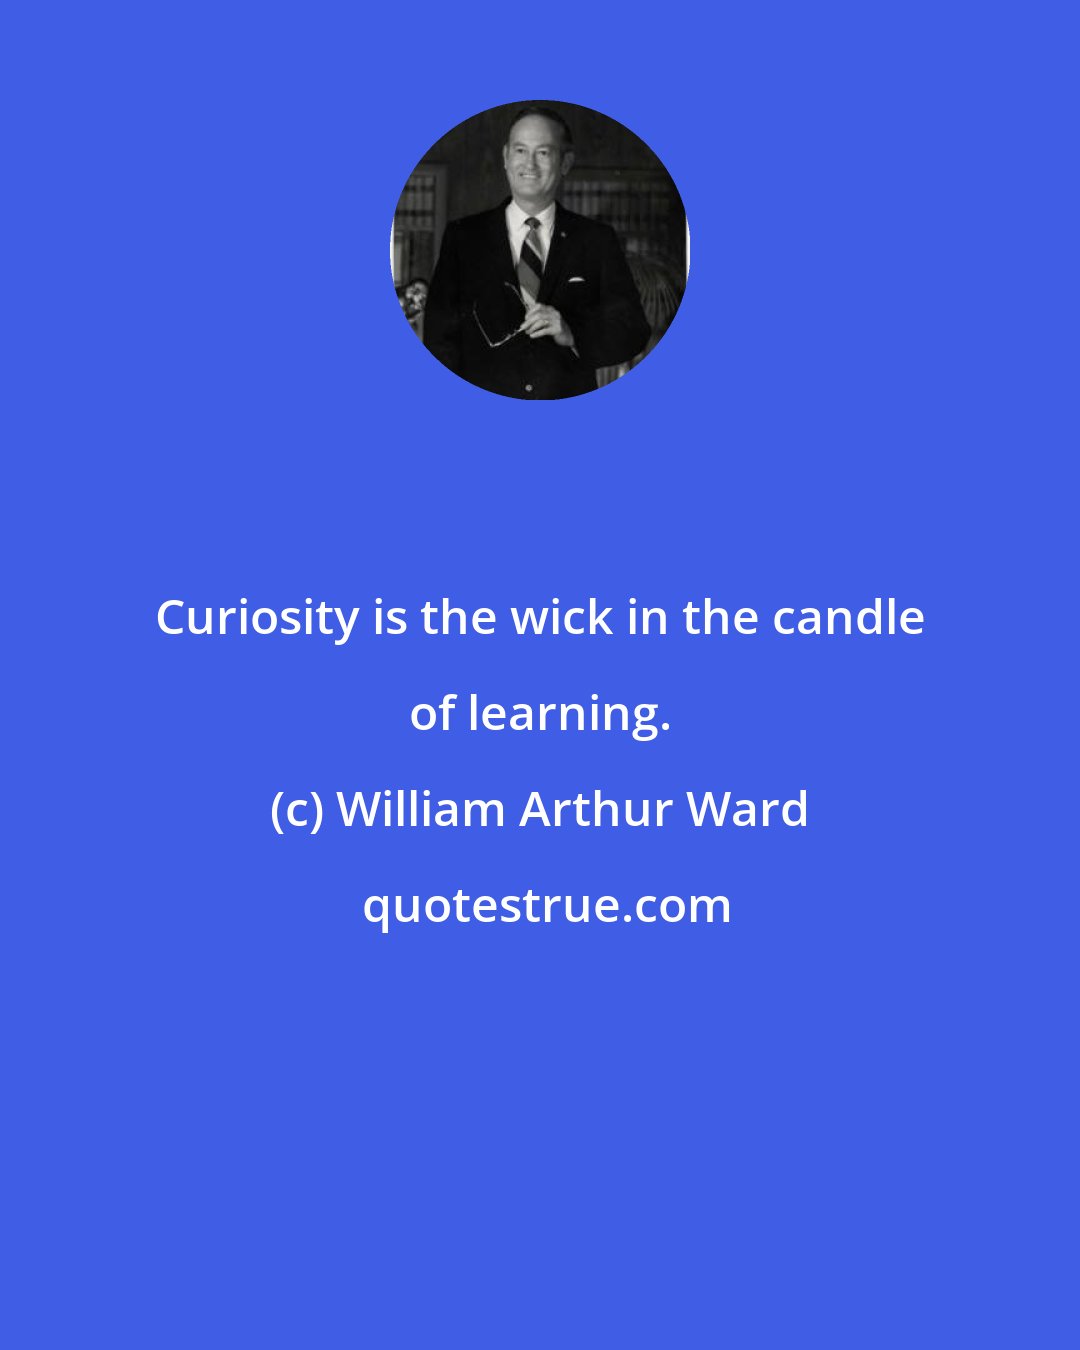 William Arthur Ward: Curiosity is the wick in the candle of learning.